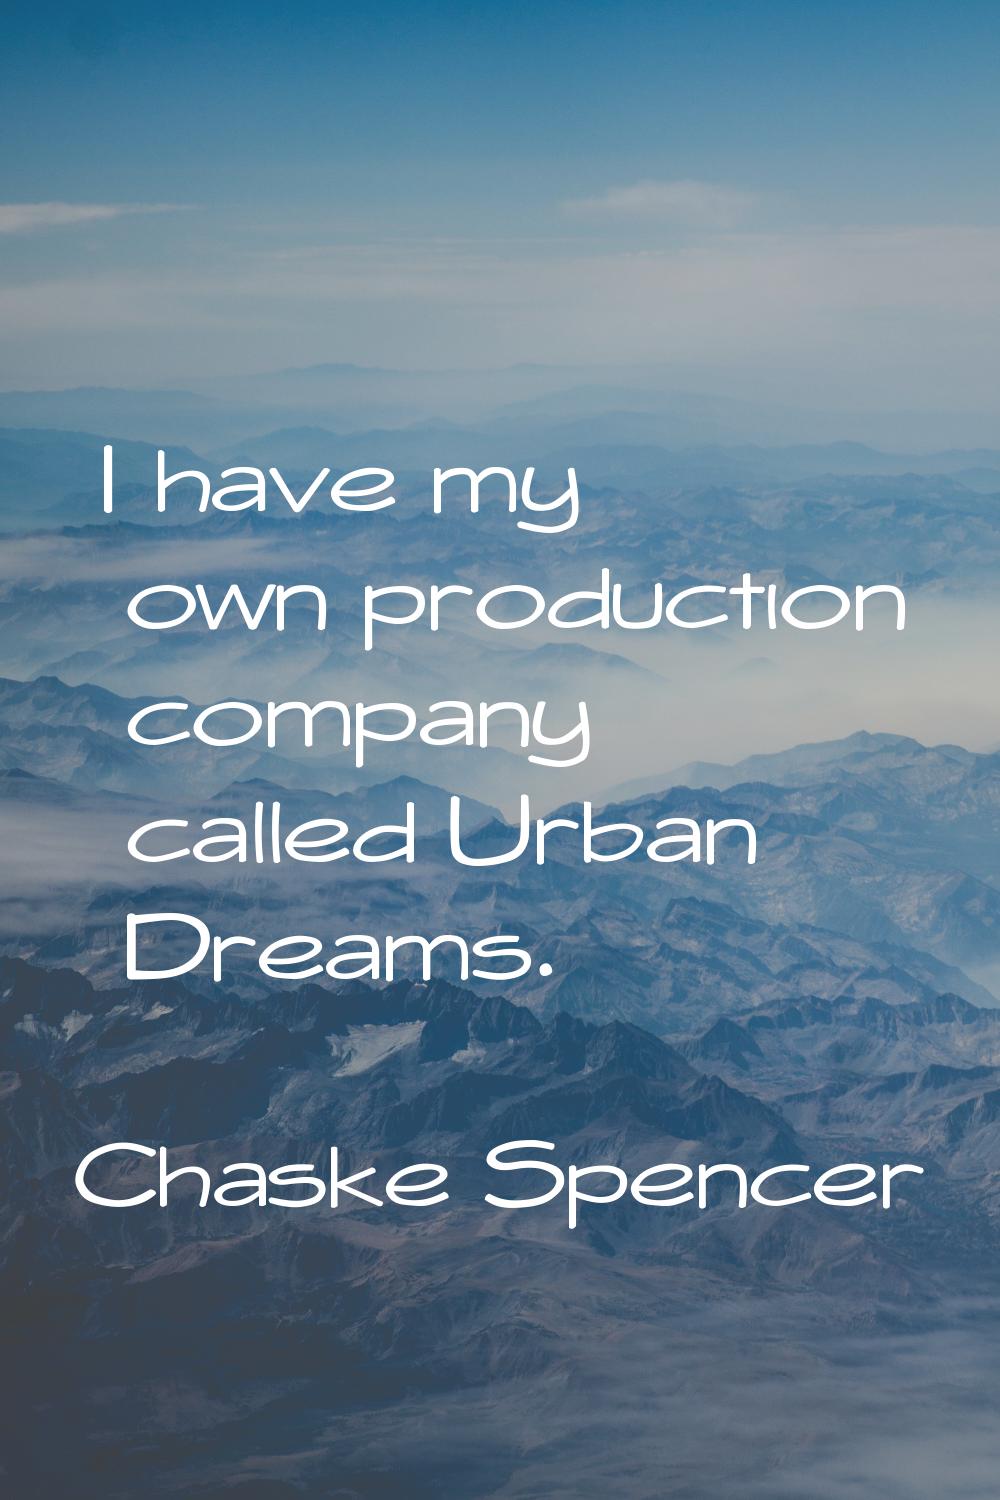 I have my own production company called Urban Dreams.